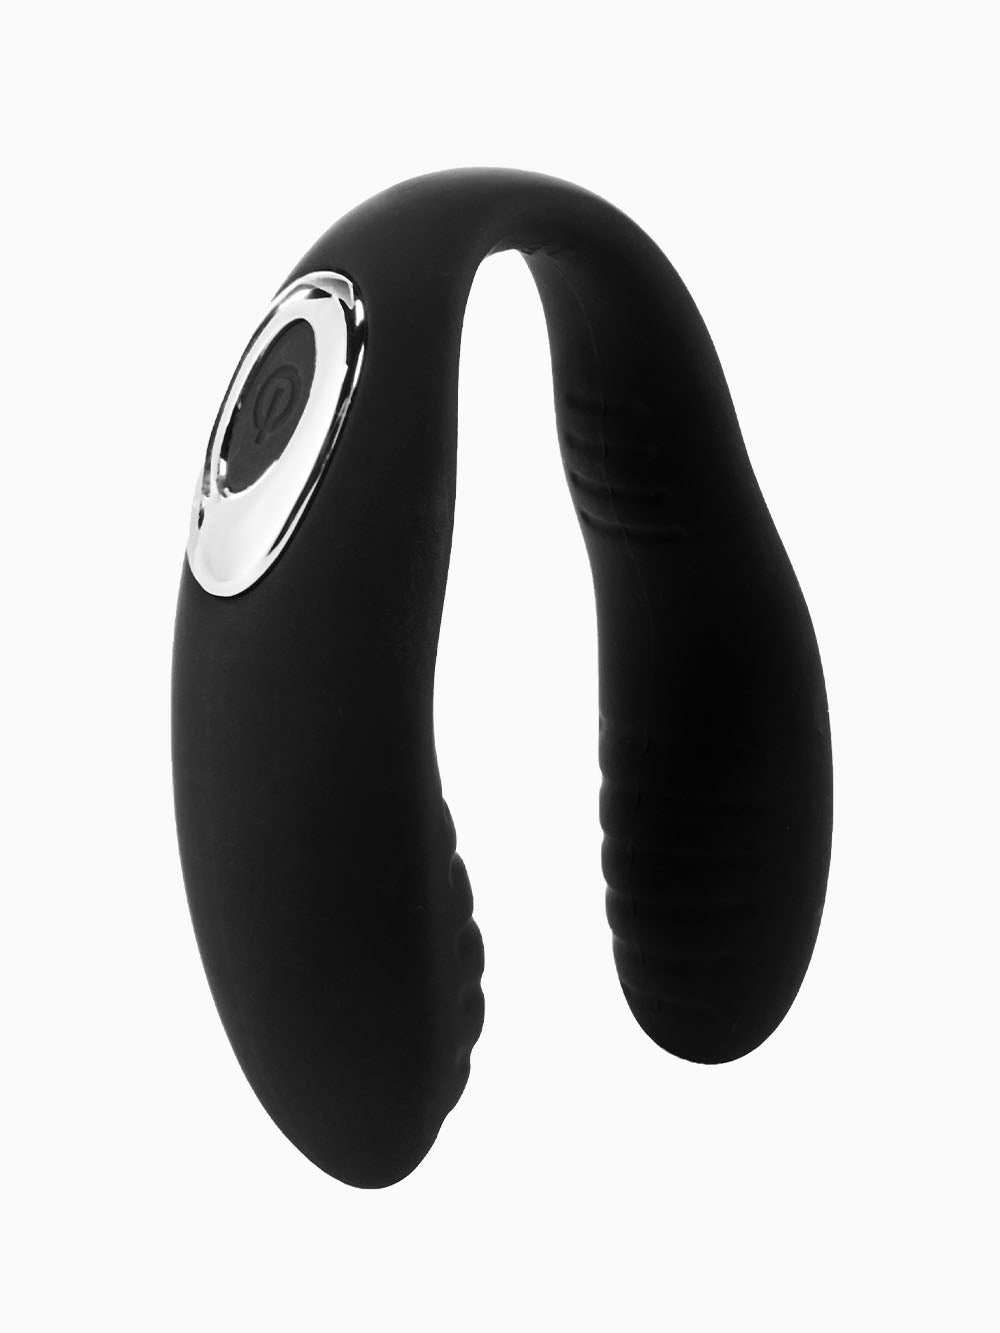 Pillow Talk Dual Mouth And Clitoral Vibrator Black, 3 Inches